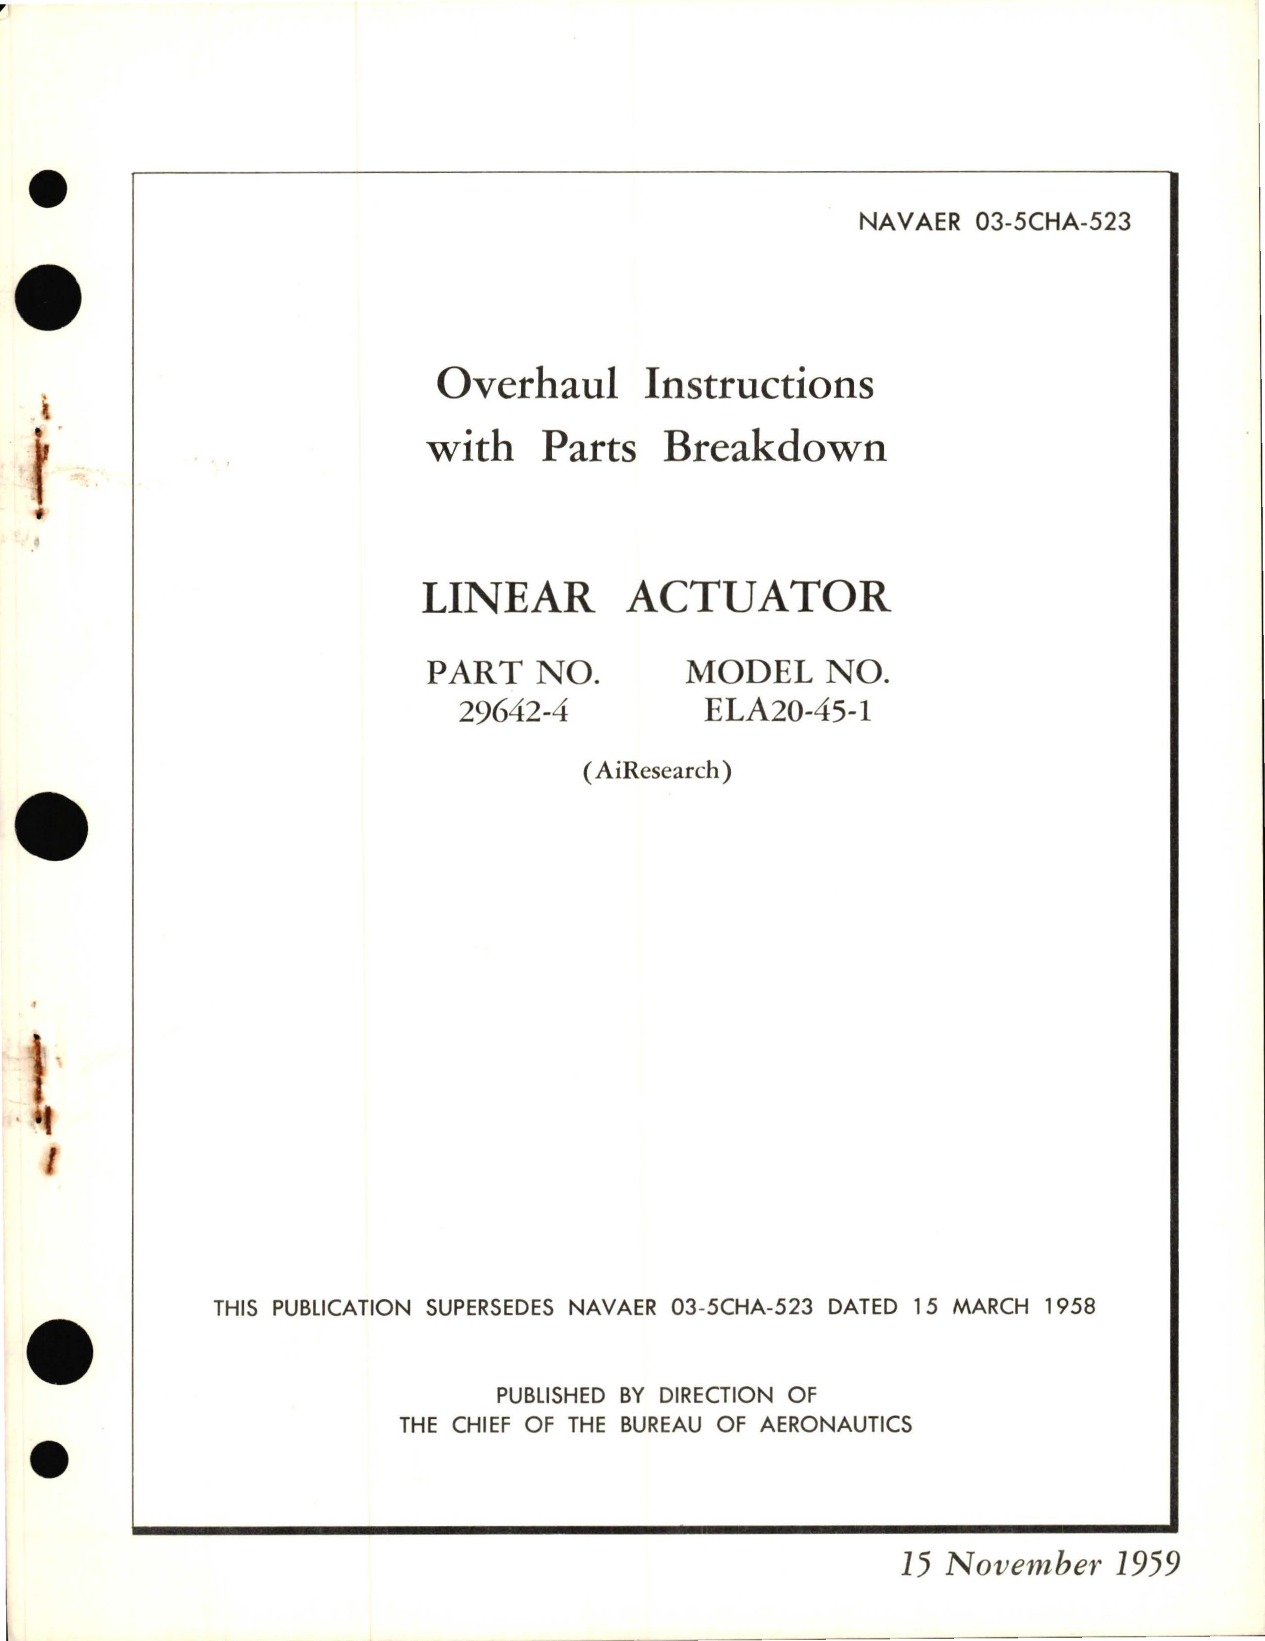 Sample page 1 from AirCorps Library document: Overhaul Instructions with Parts Breakdown for Linear Actuator - Part 29642-4 - Model ELA20-45-1